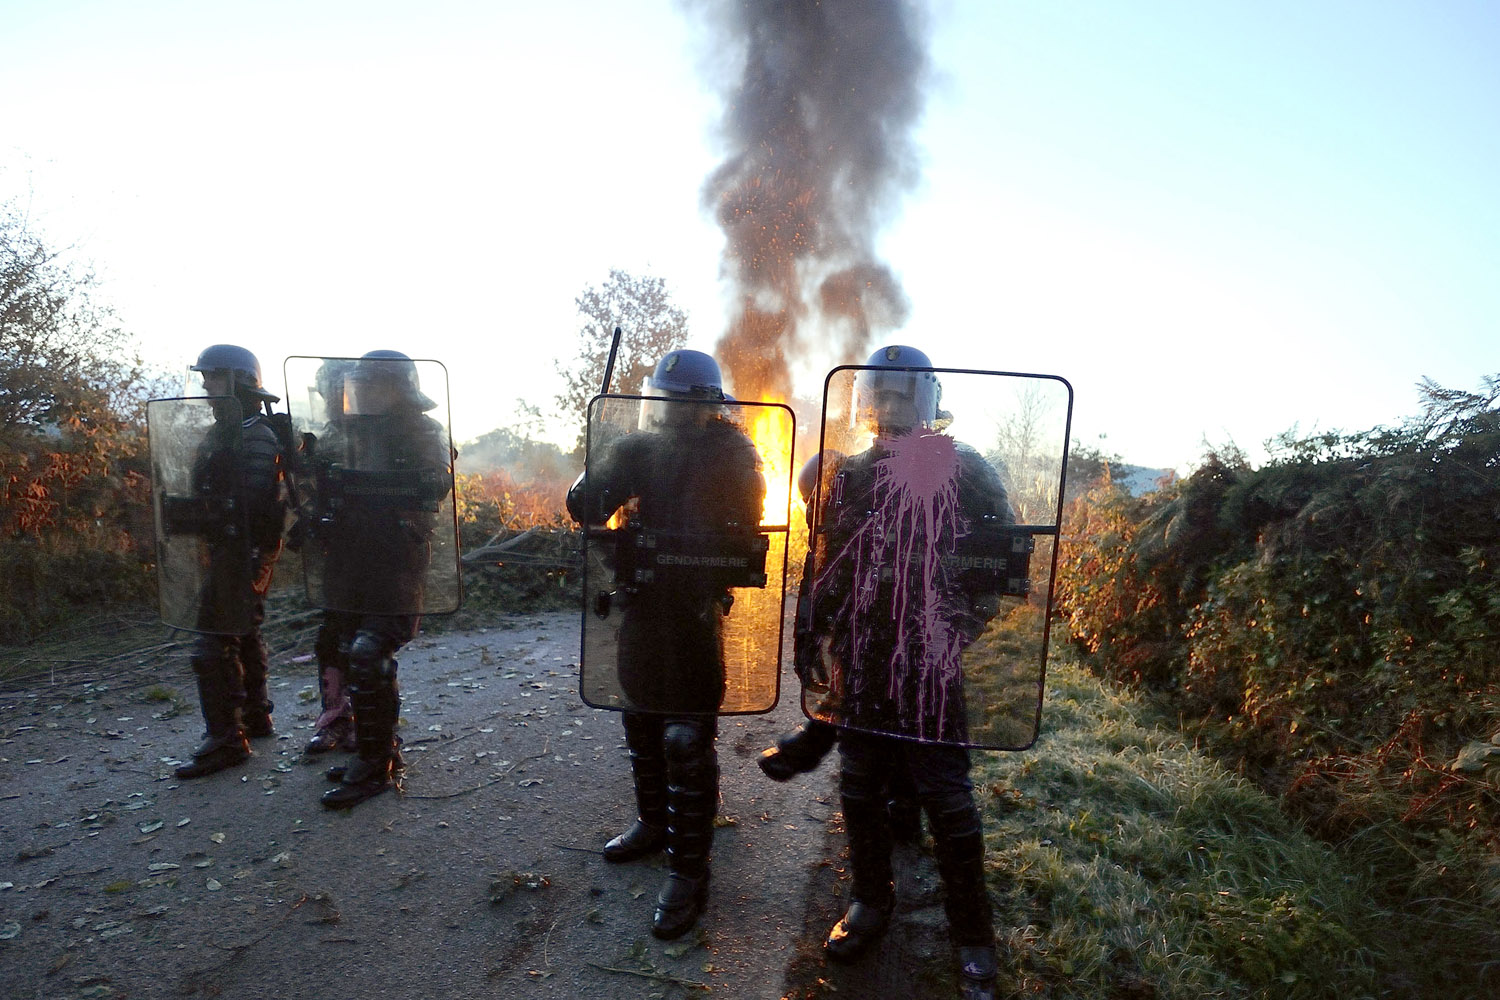 Image: Oct. 30, 2012. French gendarmes police stand guard during an evacuation of squatters who oppose a project to build an international airport in Notre-Dame-des-Landes, in western France.